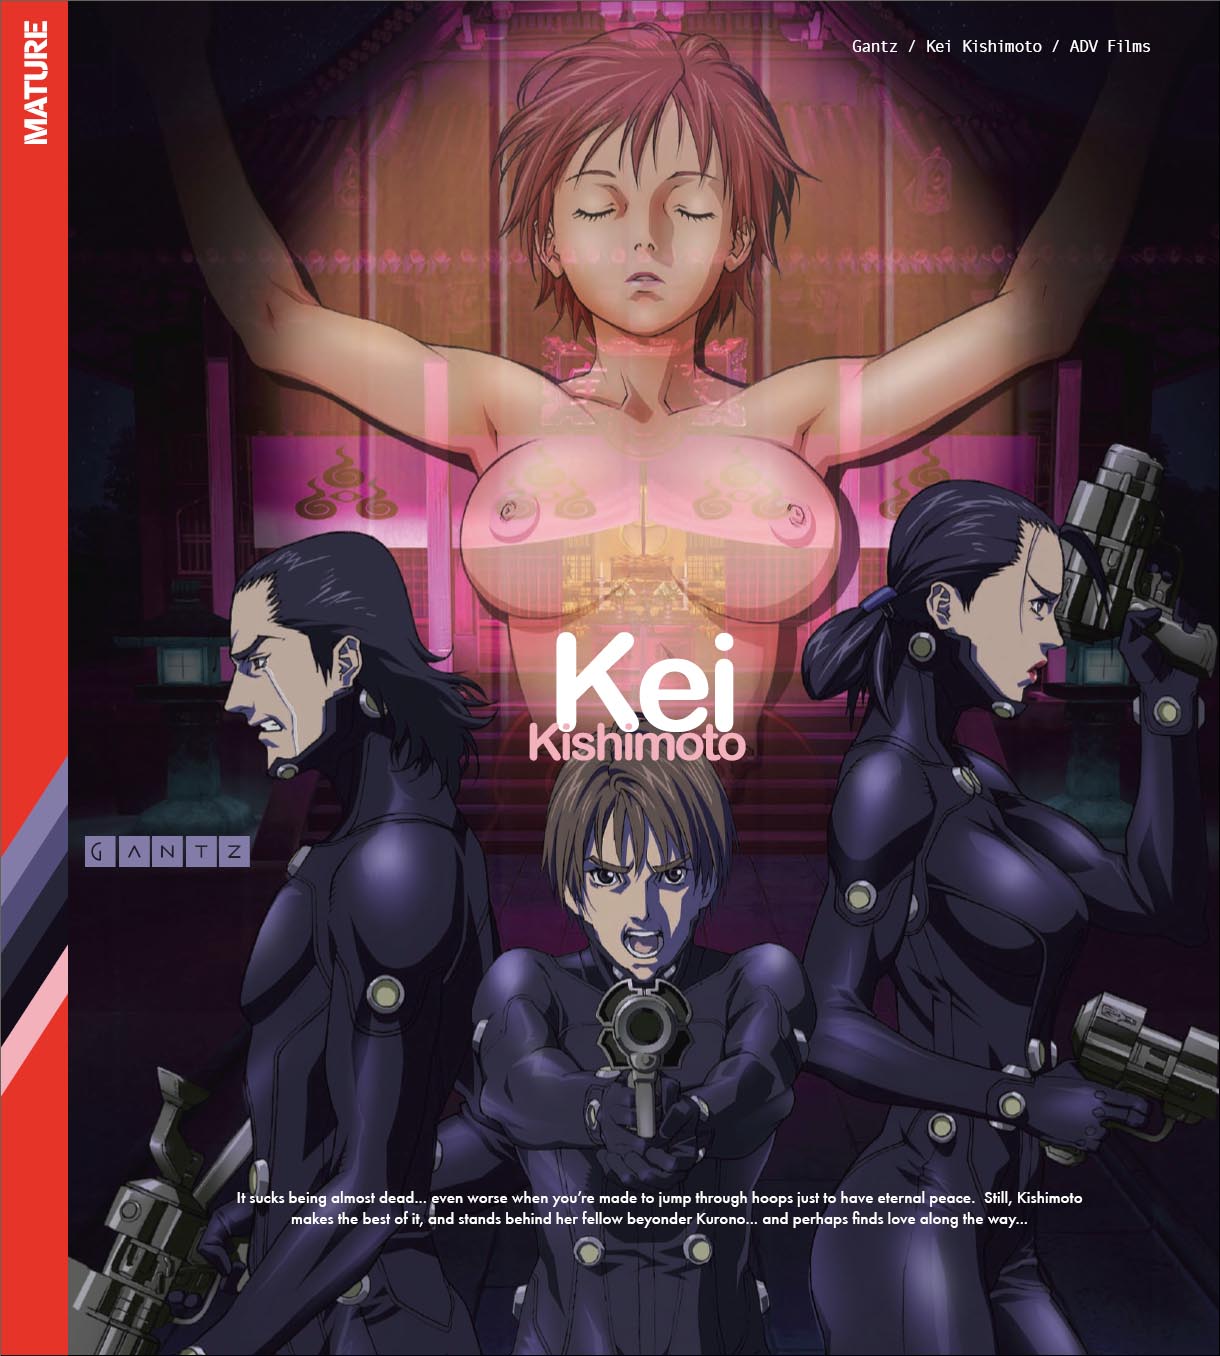 2boys 2girls angry armpits arms_up back-to-back bangs big_breasts black_hair bodysuit breasts brown_hair clenched_teeth closed_eyes cover dual_wielding dvd dvd_cover fighting_stance gantz gantz_suit gonzo gun guns hair hair_ornament highres jujutsu_kaisen katou_masaru kei_kishimoto kei_kurono kishimoto_kei kurono_kei lipstick lying makeup masaru_kato multiple_boys multiple_girls muscle nipples nude official_art on_back on_floor open_mouth outstretched_arms ponytail sakuraoka_sei scan sei_sakuraoka shimohira_reika short_hair skin_tight sleeping spread_arms tears teeth weapon